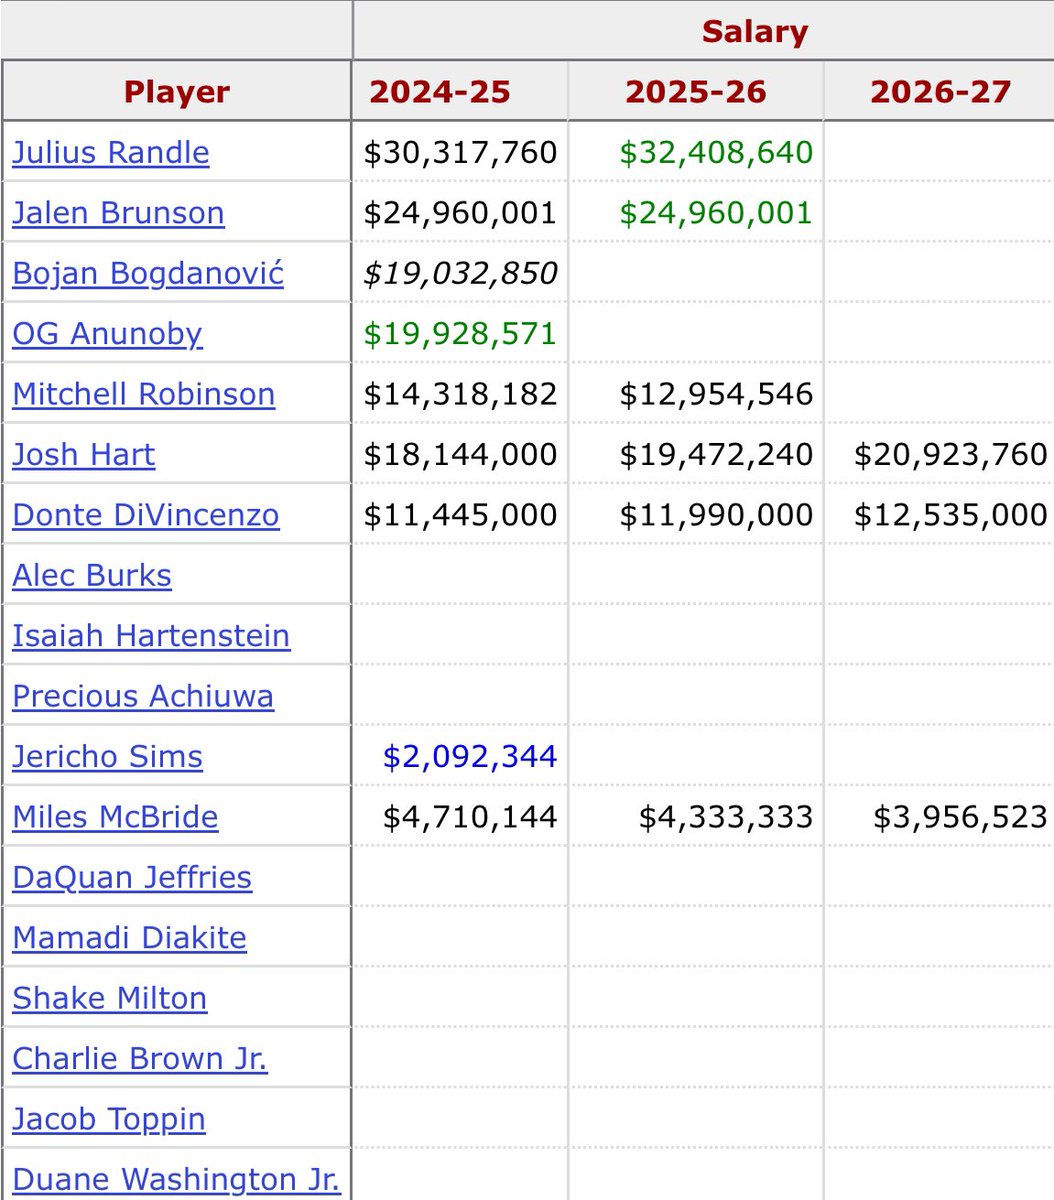 Knicks cap situation is very clean. Nothing but great and/or movable contracts. About to get a bit more expensive with OG + Hartenstein this summer, but still an impressive job by Leon & team to build sustainably with growth potential. Ton of picks in the arsenal as well.